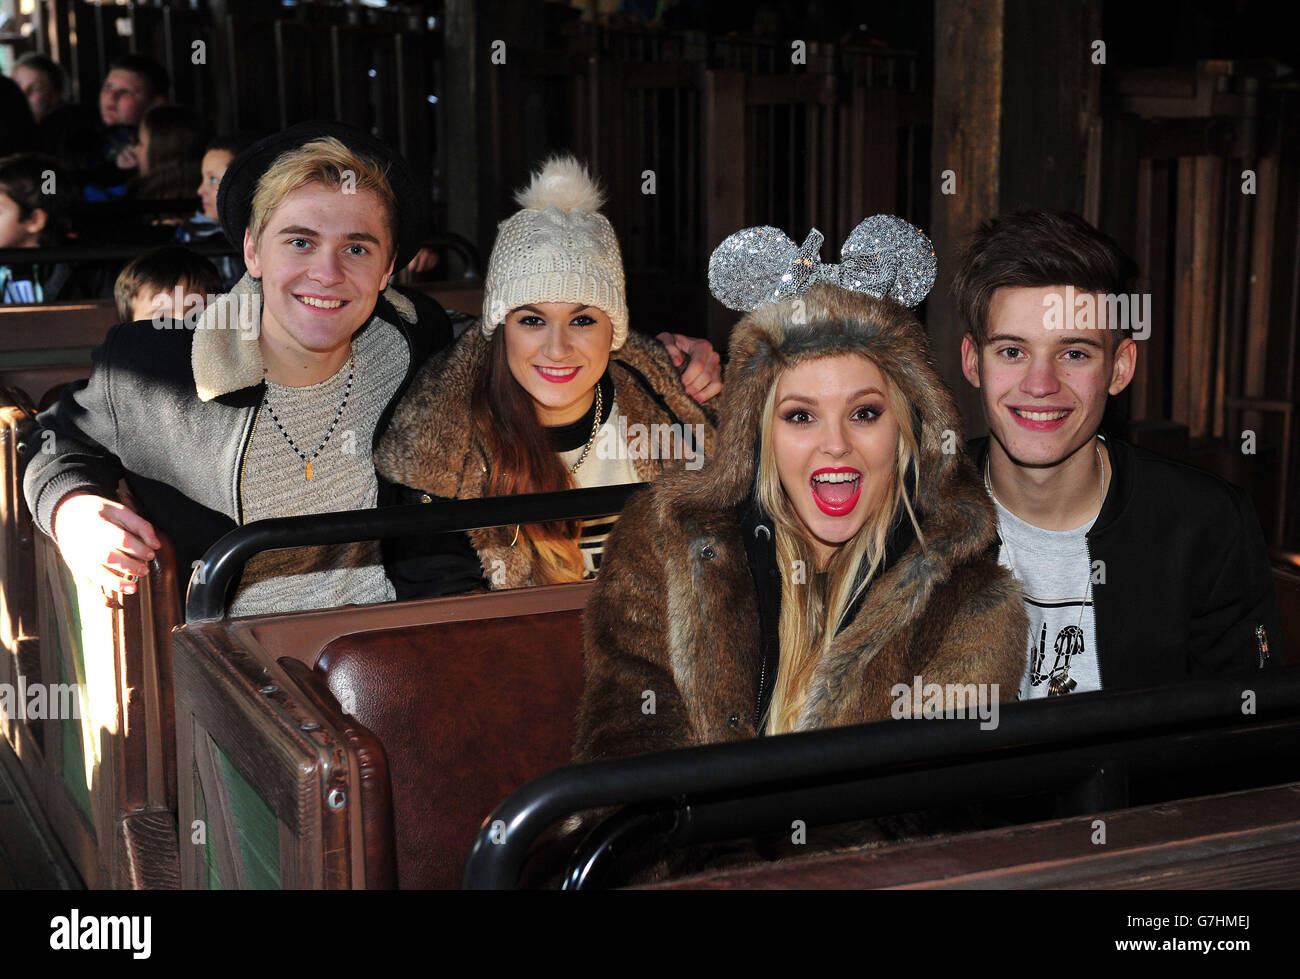 (Left to right) Mikey Russell-Bromley, Parisa Tarjomani, Betsey-Blue English and Charlie George of Only the Young, ride Thunder Mountain, during the charity trip to Disneyland Paris for under privileged children. Stock Photo